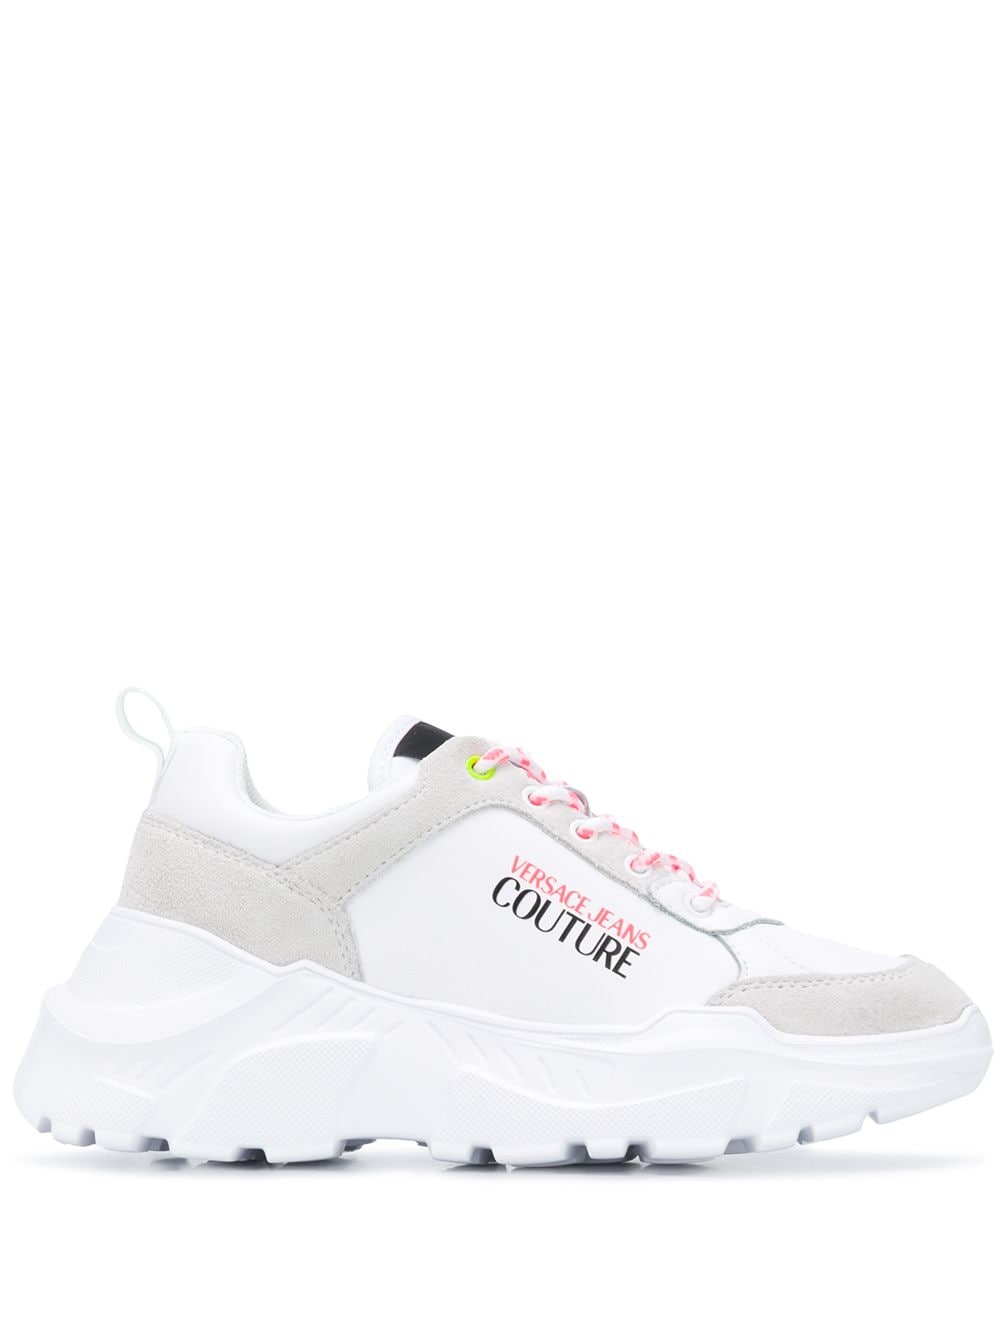 versace jeans sneakers white